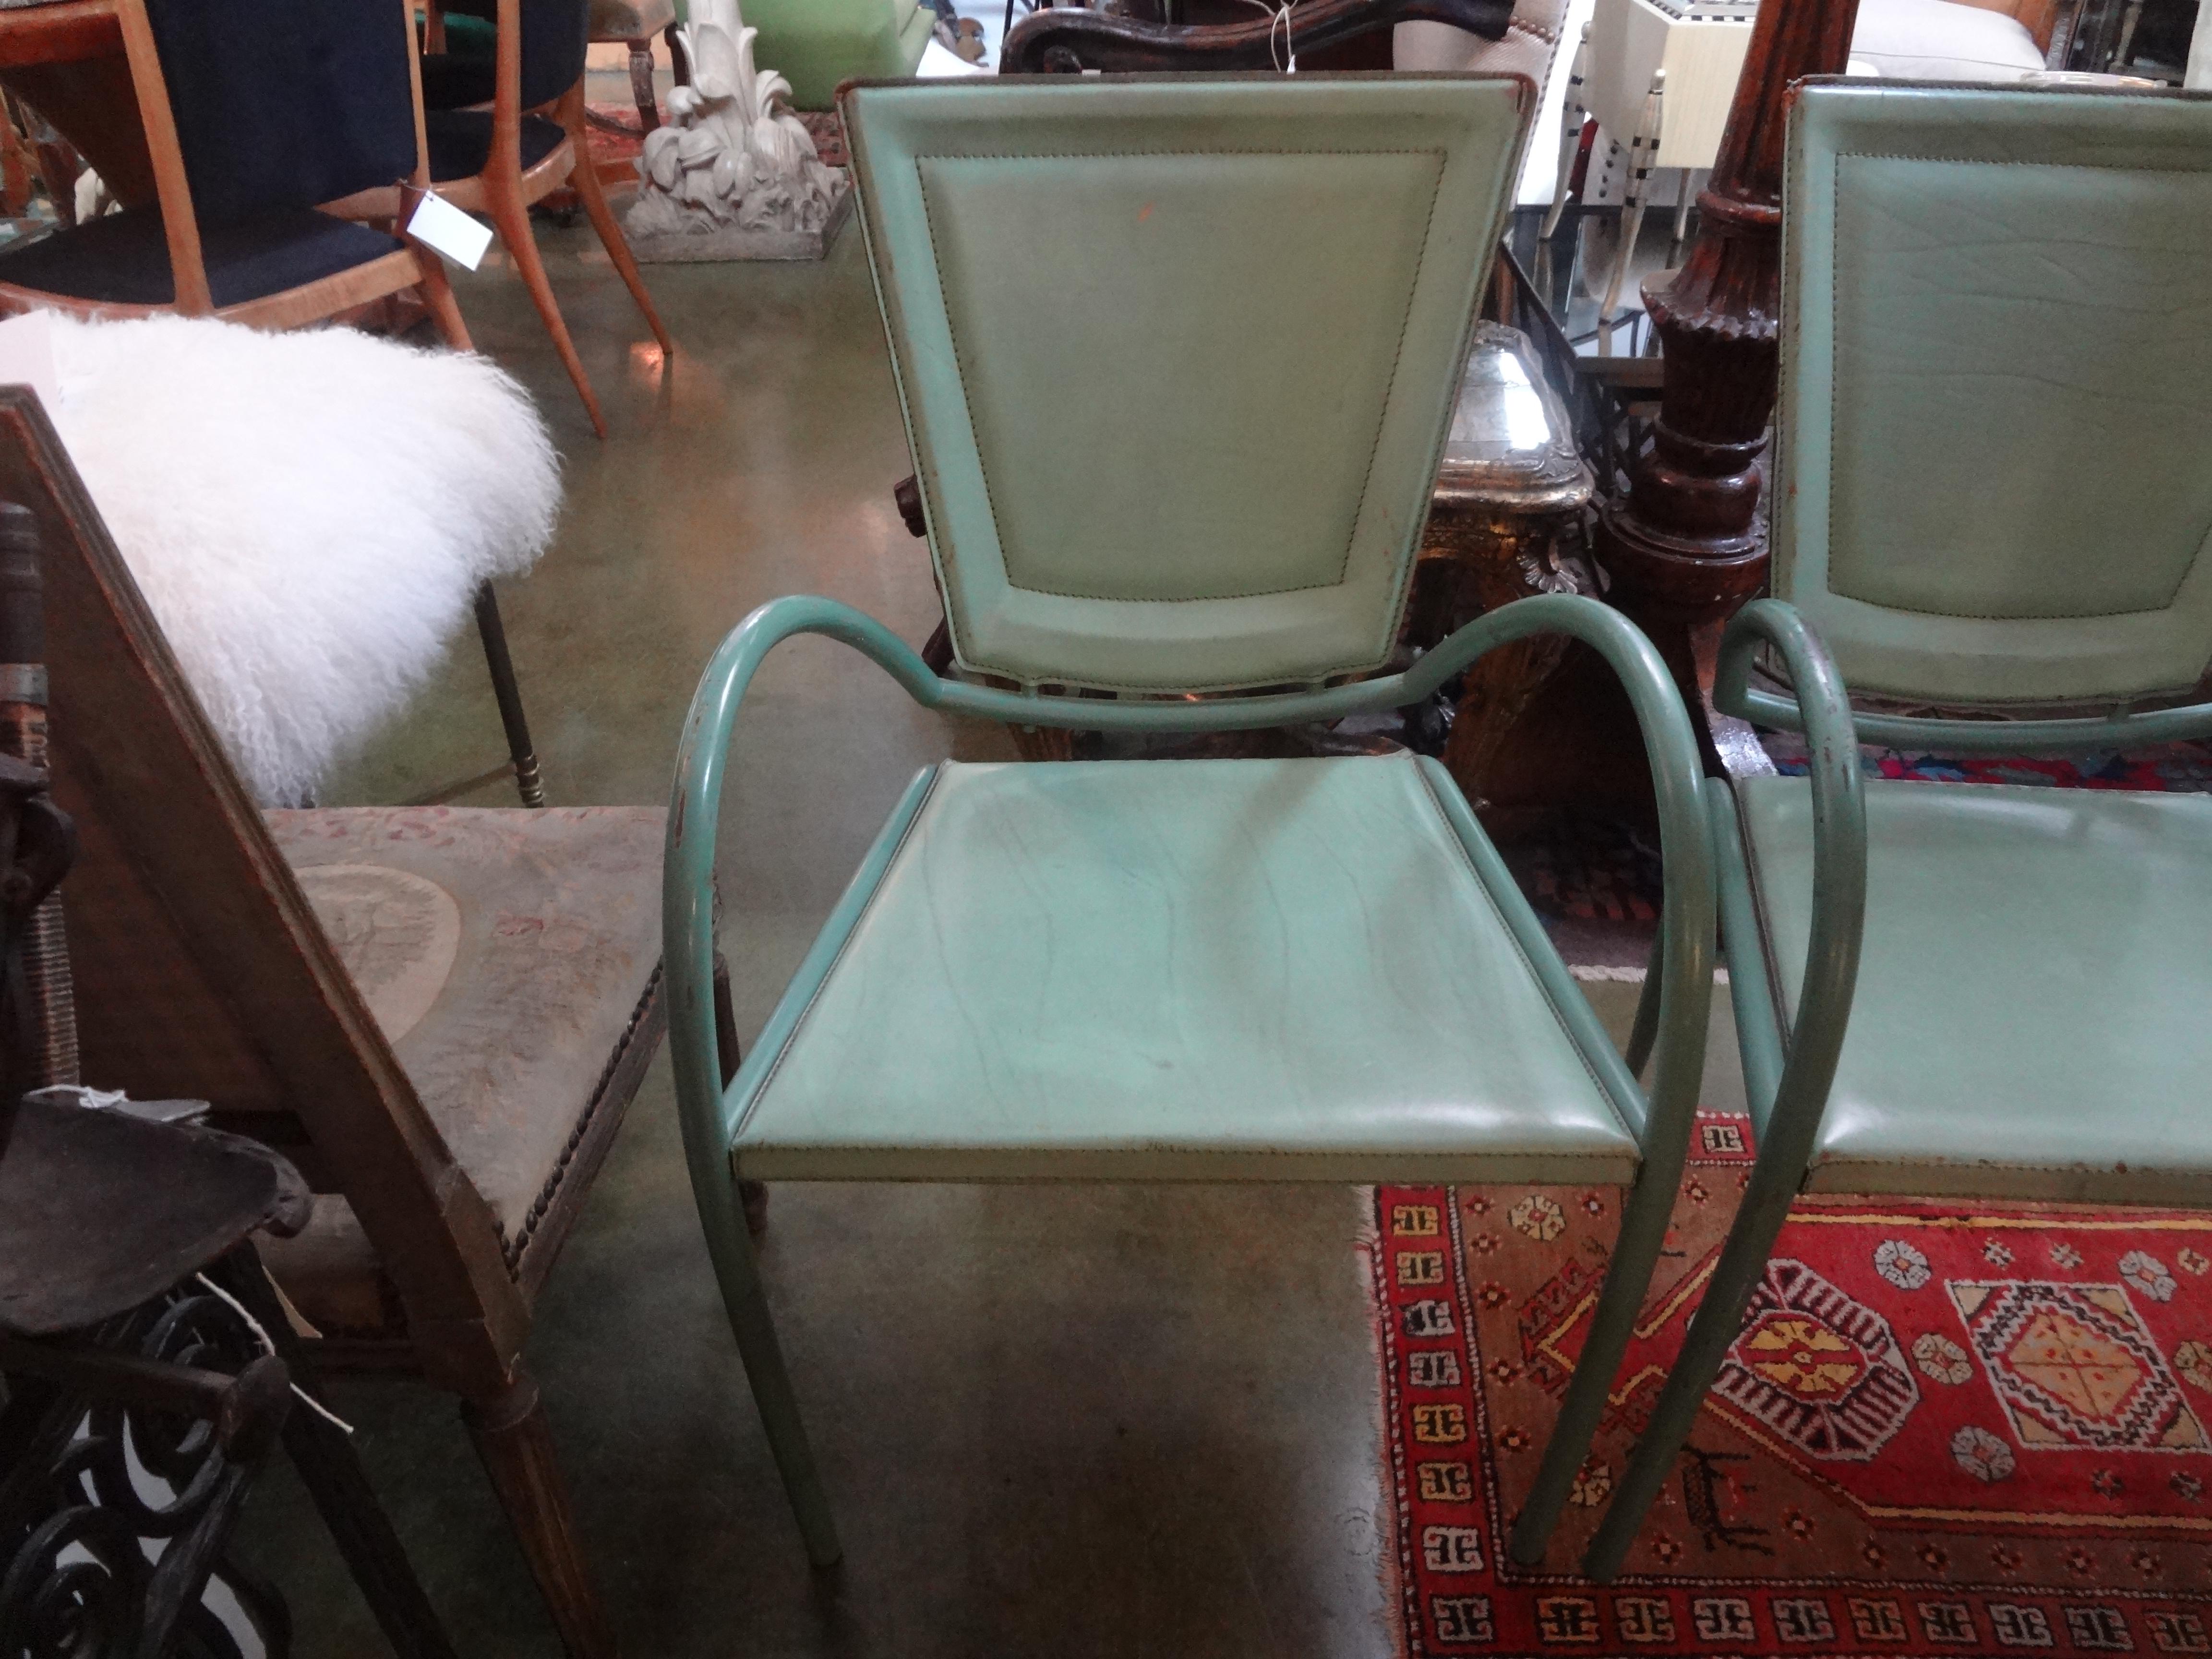 Pair of Italian Sawaya and Moroni iron and leather chairs.
Stunning pair of Italian iron and leather chairs by Sawaya & Moroni, made in Milan. These Italian side chairs are in a fabulous green iron and green stitched leather and retain their